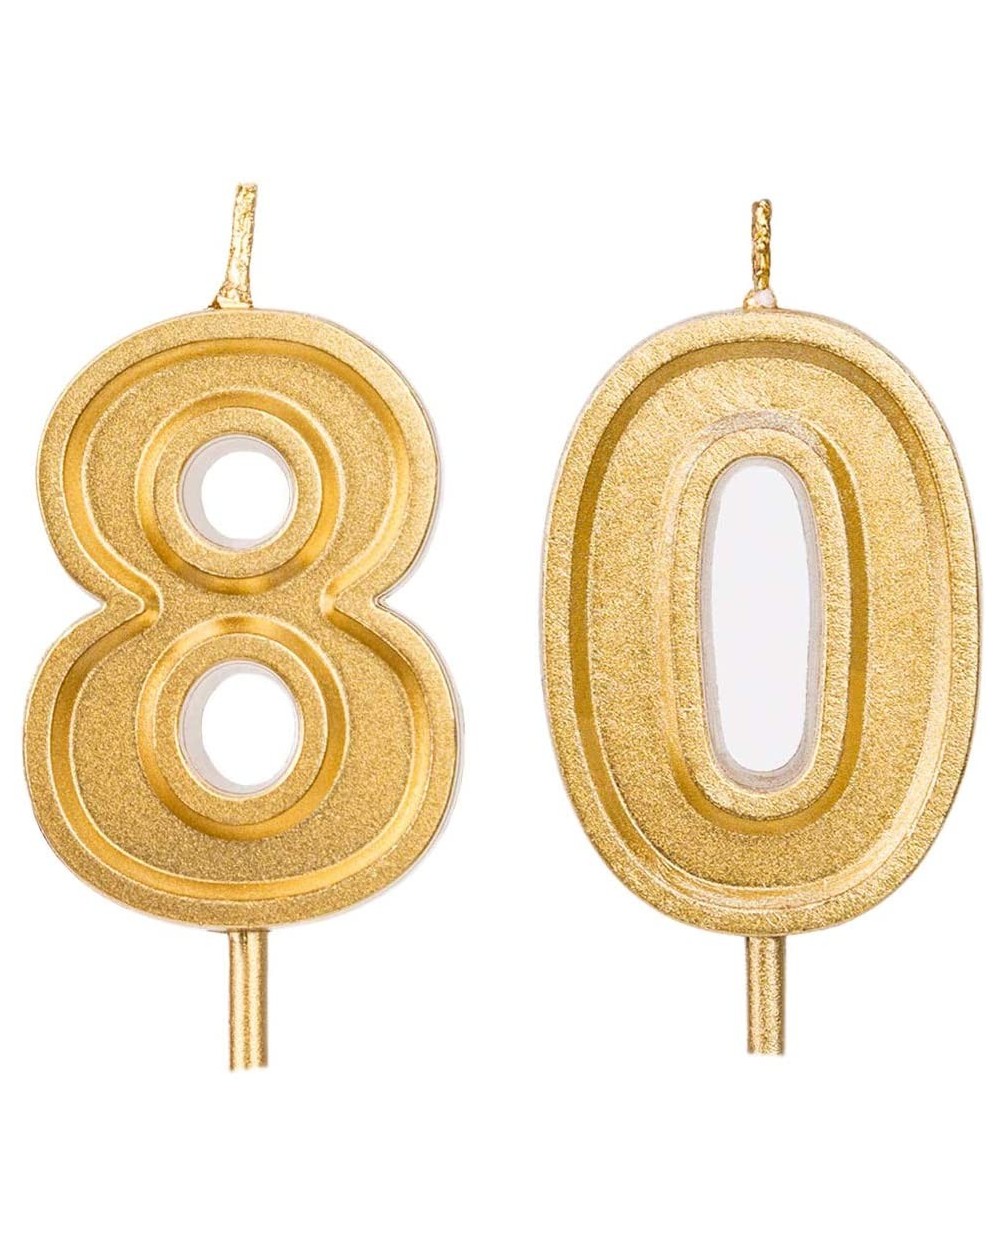 Cake Decorating Supplies 2.76 inch Gold Number 80 Birthday Candles-80th Cake Topper for Birthday Decorations - CE194AWS5GG $1...